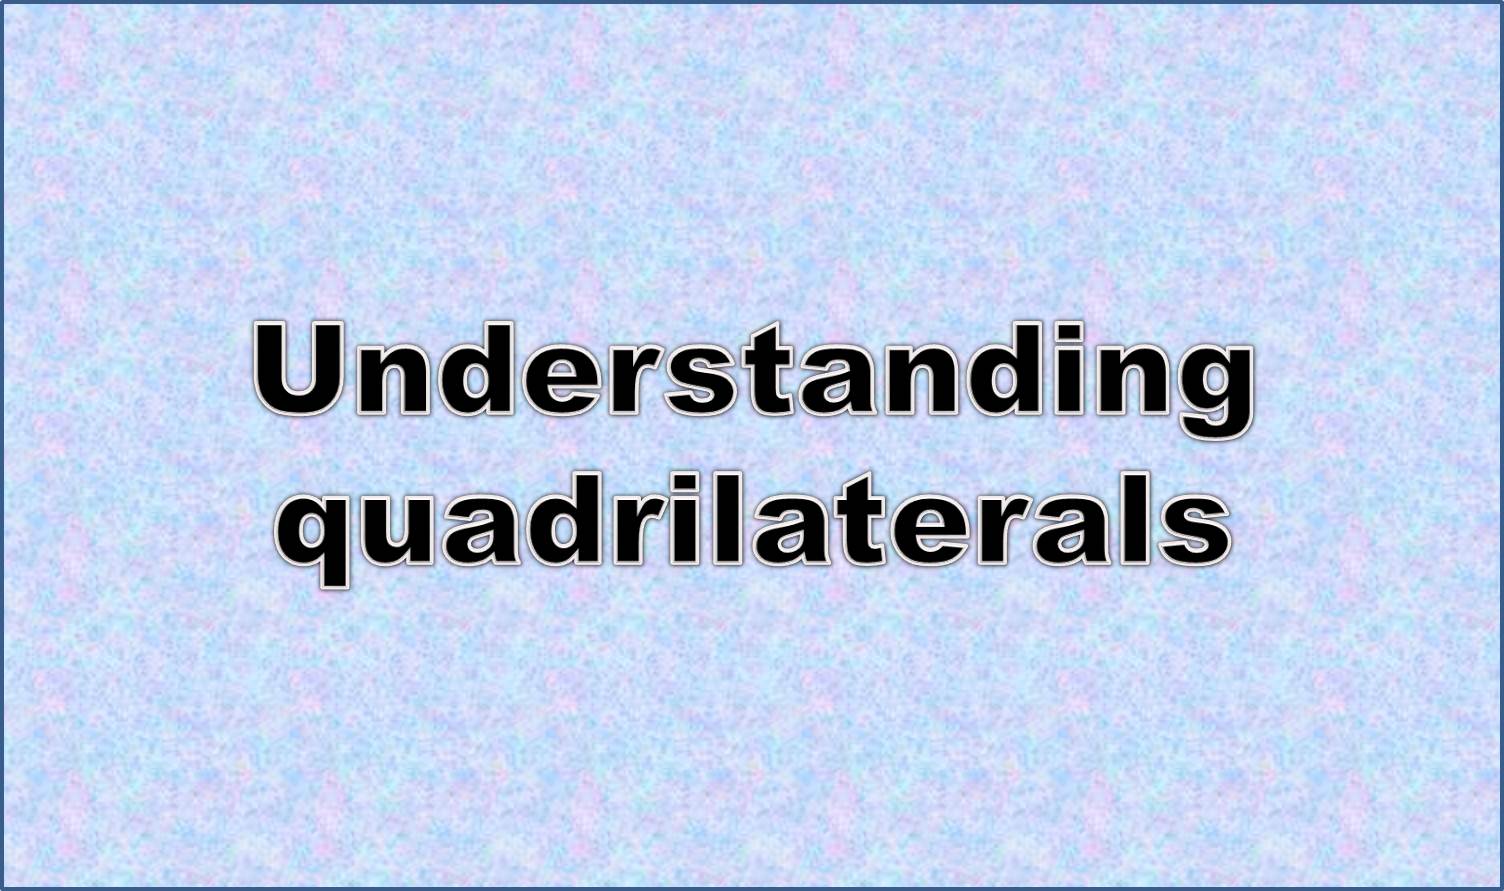 http://study.aisectonline.com/images/Quadrilateral properties.jpg